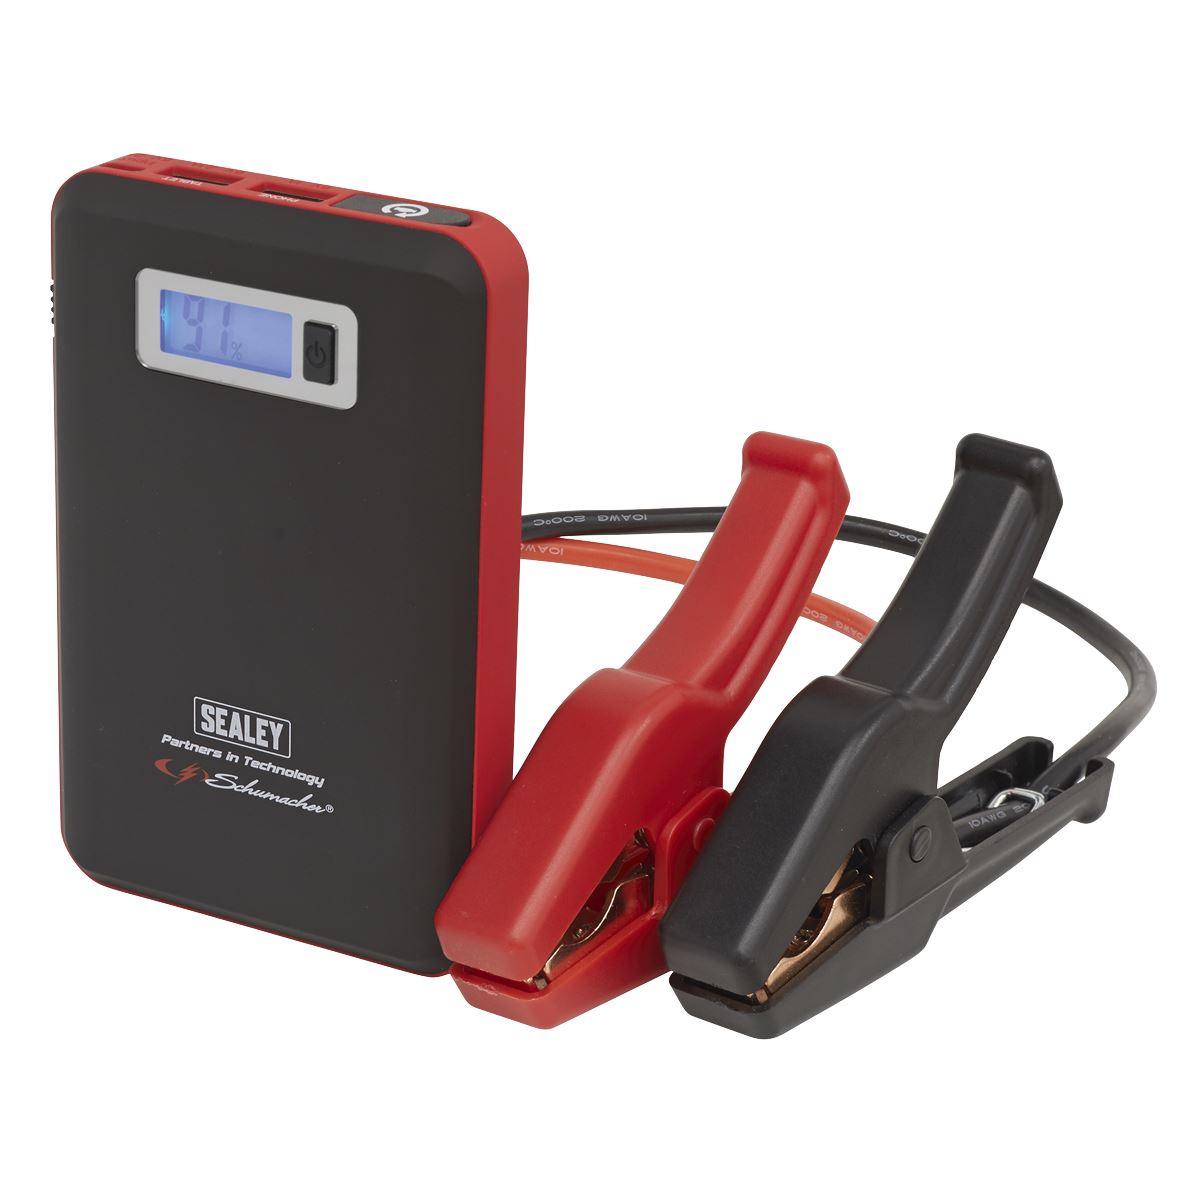 Sealey Schumacher 400A Lithium-Ion (LICOO2) Jump Starter Power Pack Compact